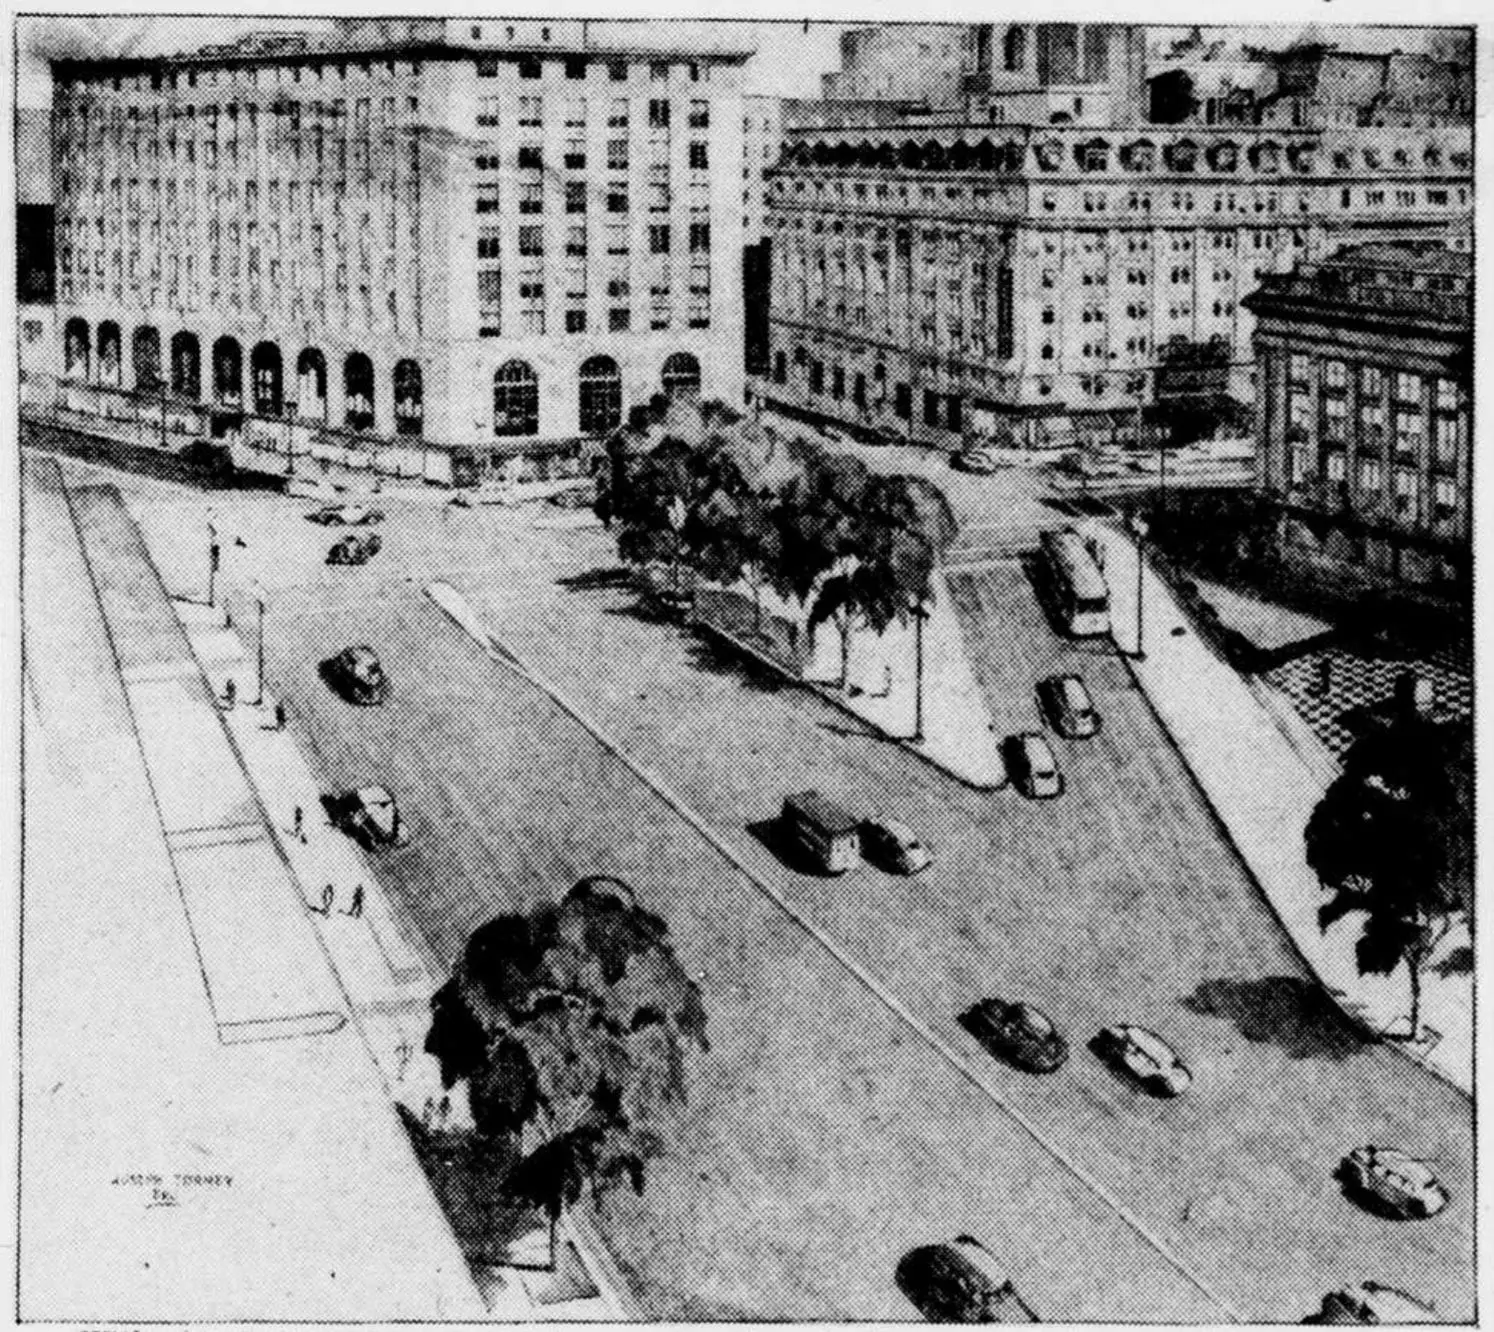 With streetcar tracks removed by construction of subways, here is an artist's conception of how the intersection of Pennsylvania avenu, Fifteenth street, G street and New York avenue would appear